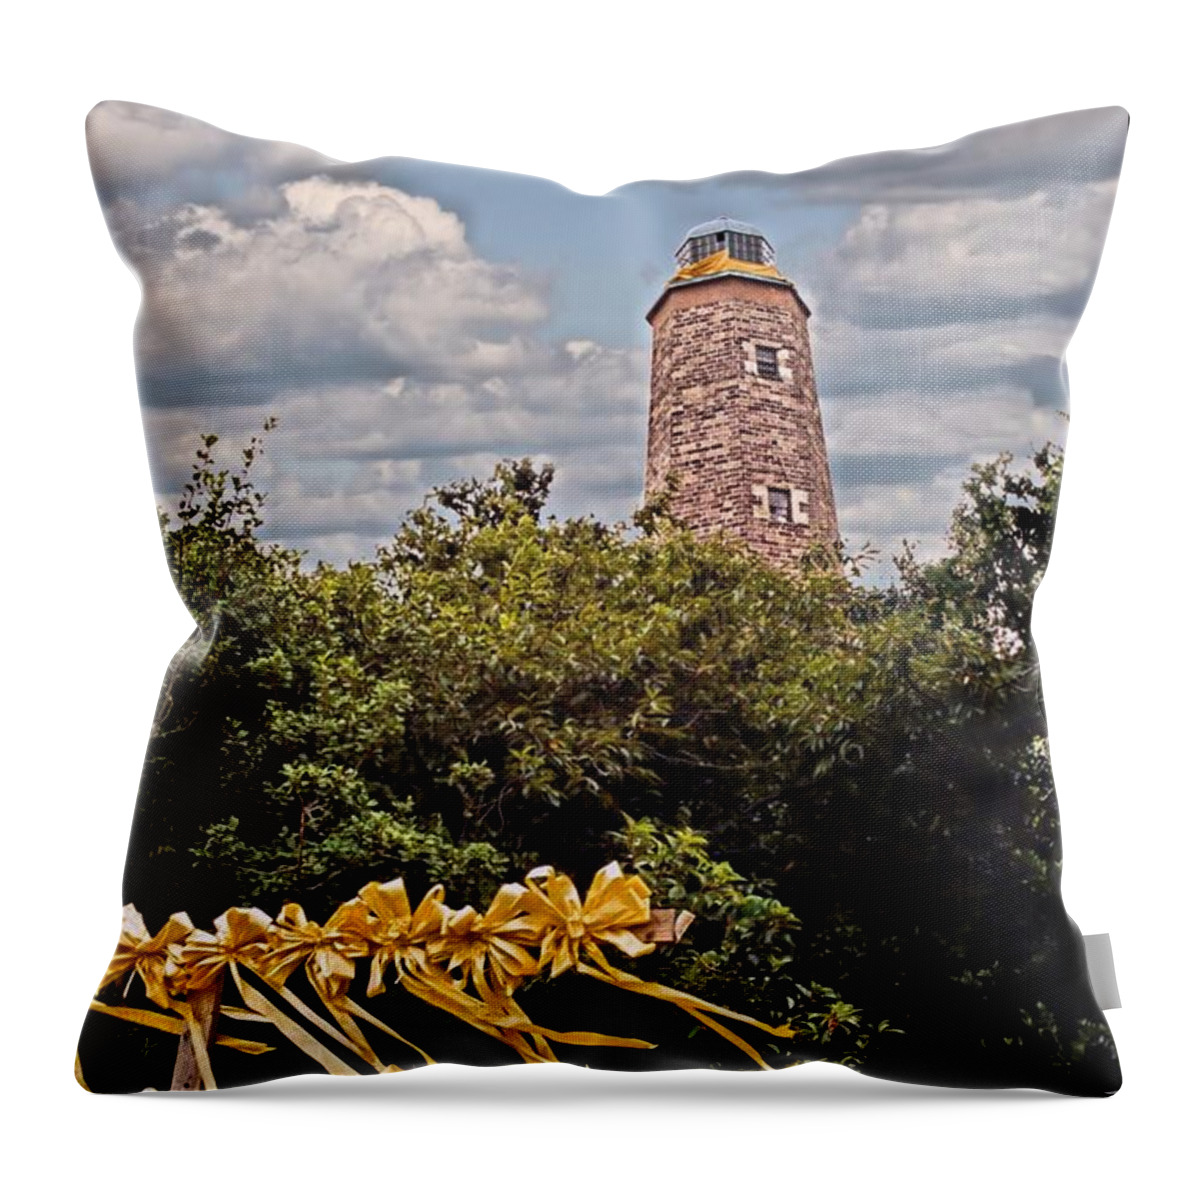 Patriot Throw Pillow featuring the photograph United We Stand by DJ Florek